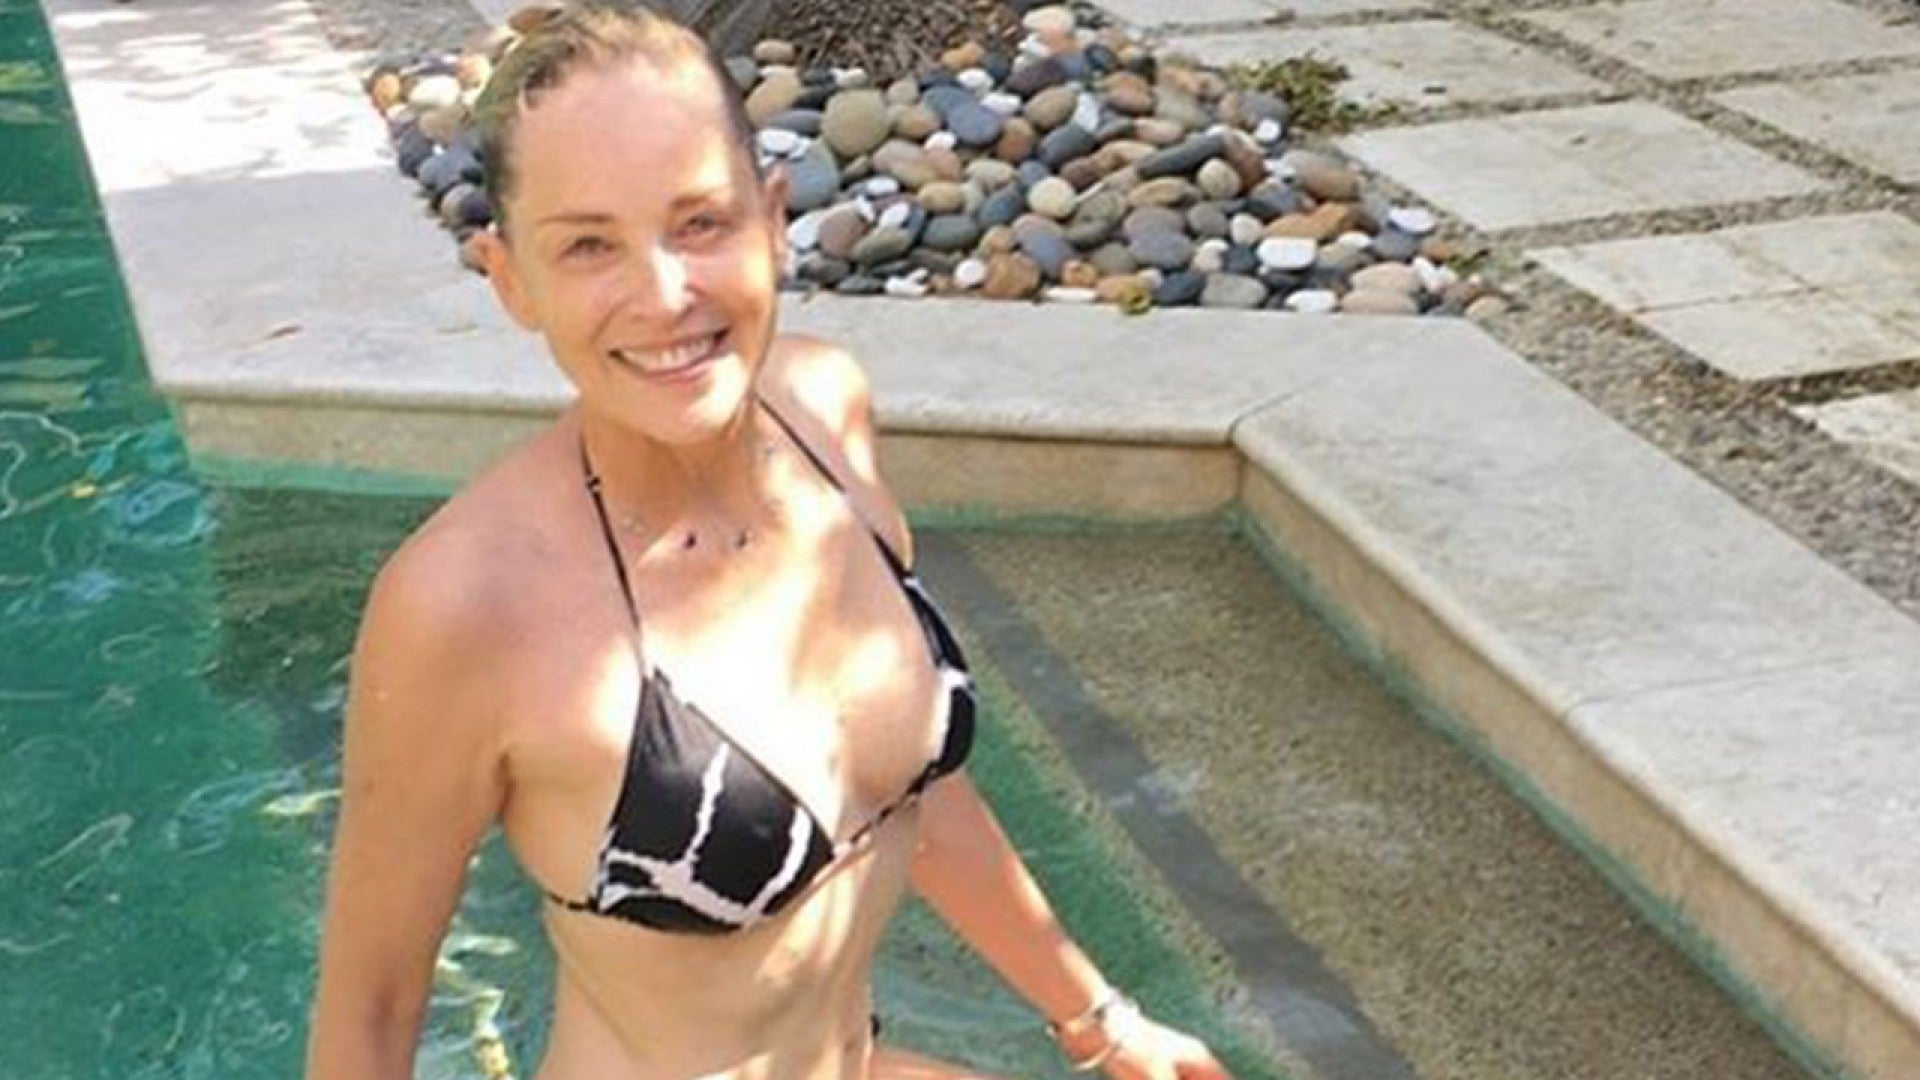 EXCLUSIVE Sharon Stone on Those Crazy Bikini Pics and Staying Sexy as She Nears